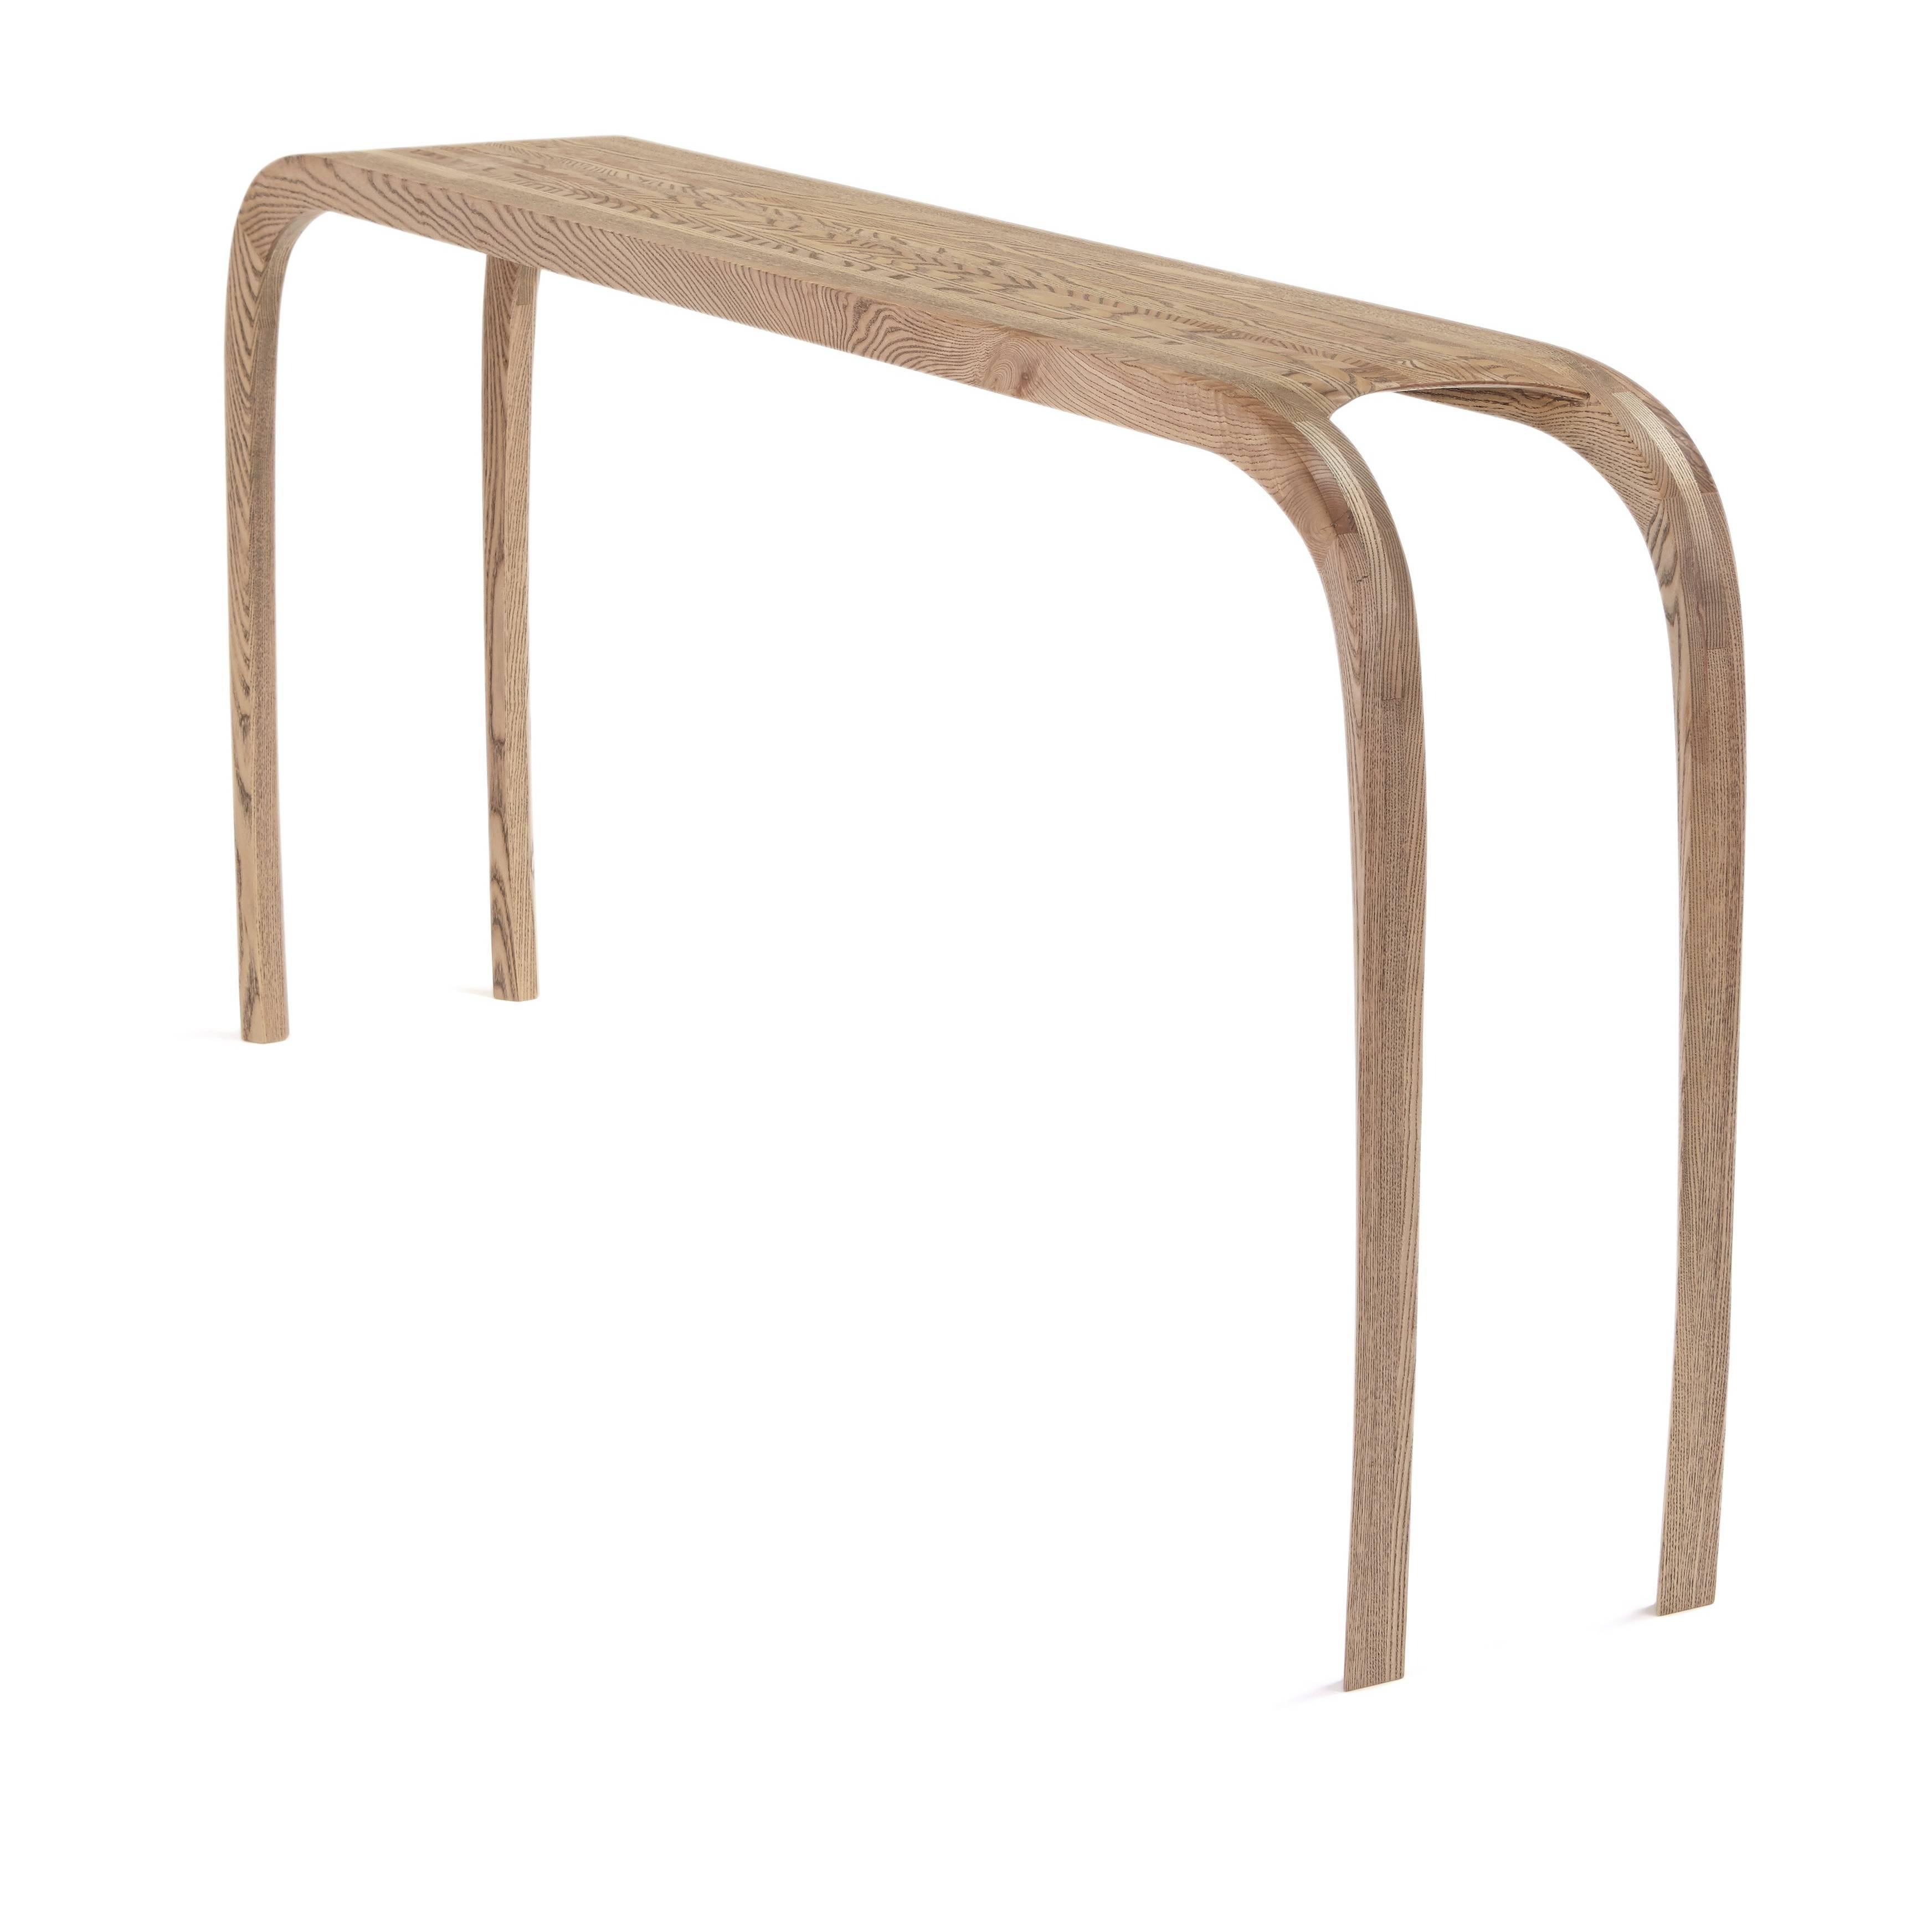  The console tables curved legs were designed to have a animal like posture and balance that flows up through the leg into the top.
The strips of ash are carefully arranged and laminated together to create a interesting visual contrast between the